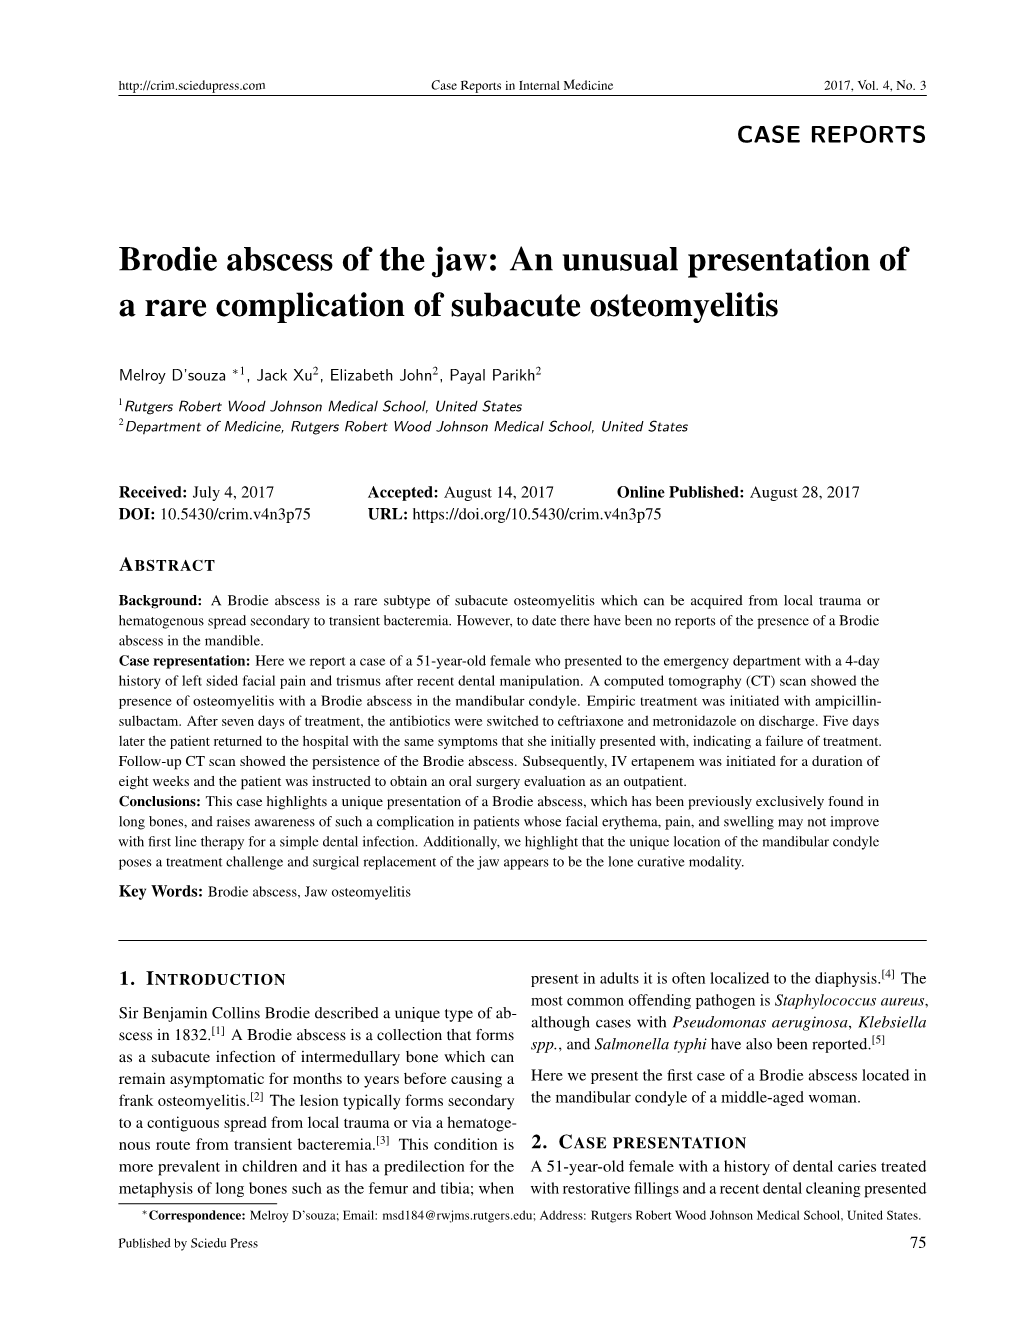 Brodie Abscess of the Jaw: an Unusual Presentation of a Rare Complication of Subacute Osteomyelitis